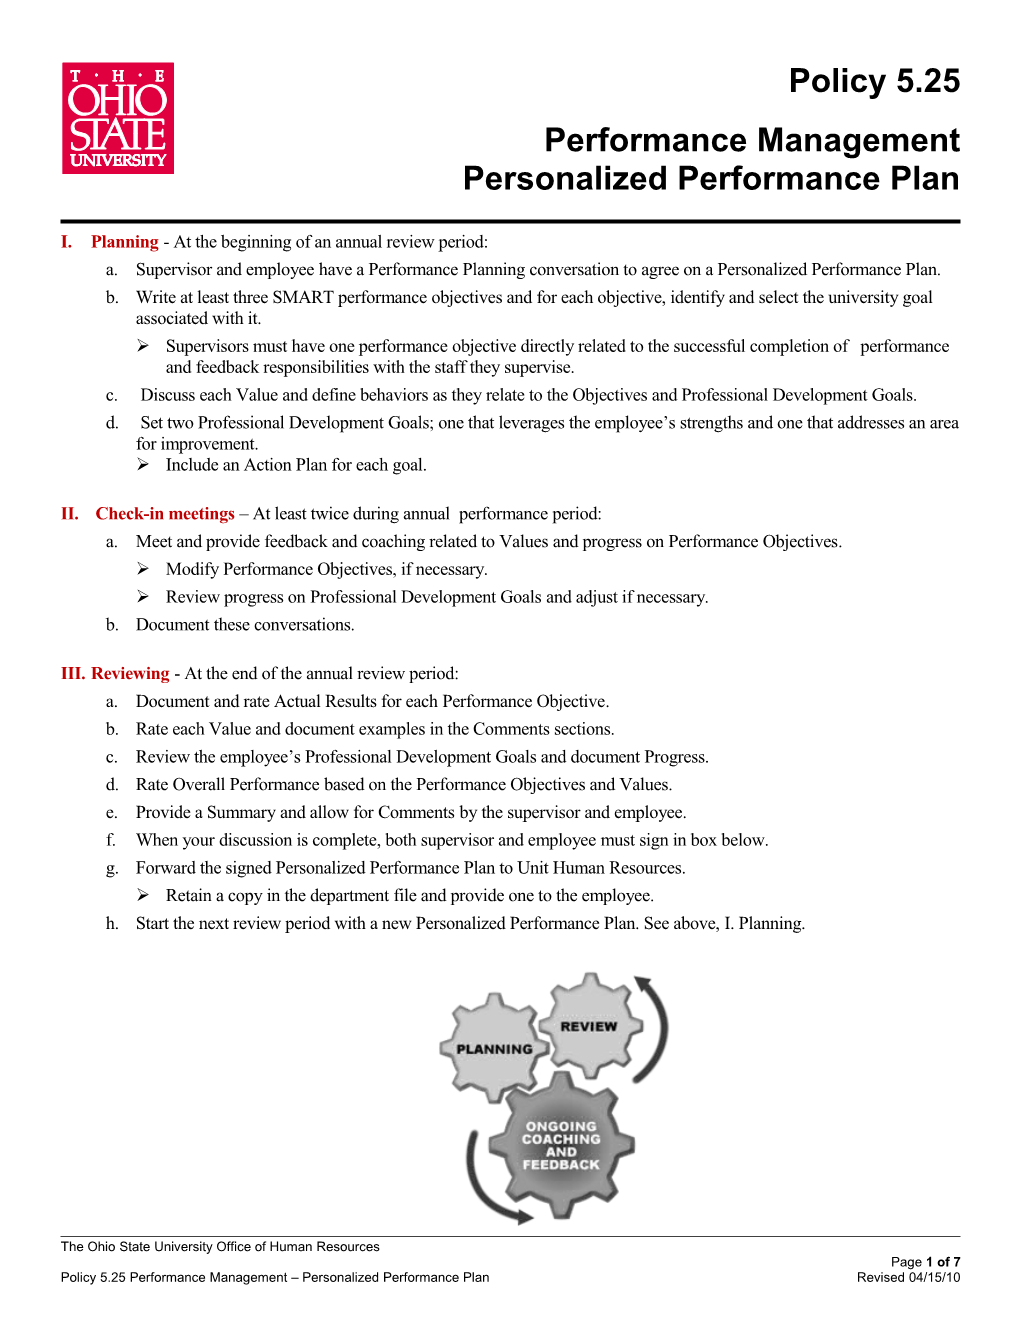 Personalized Performance Plan